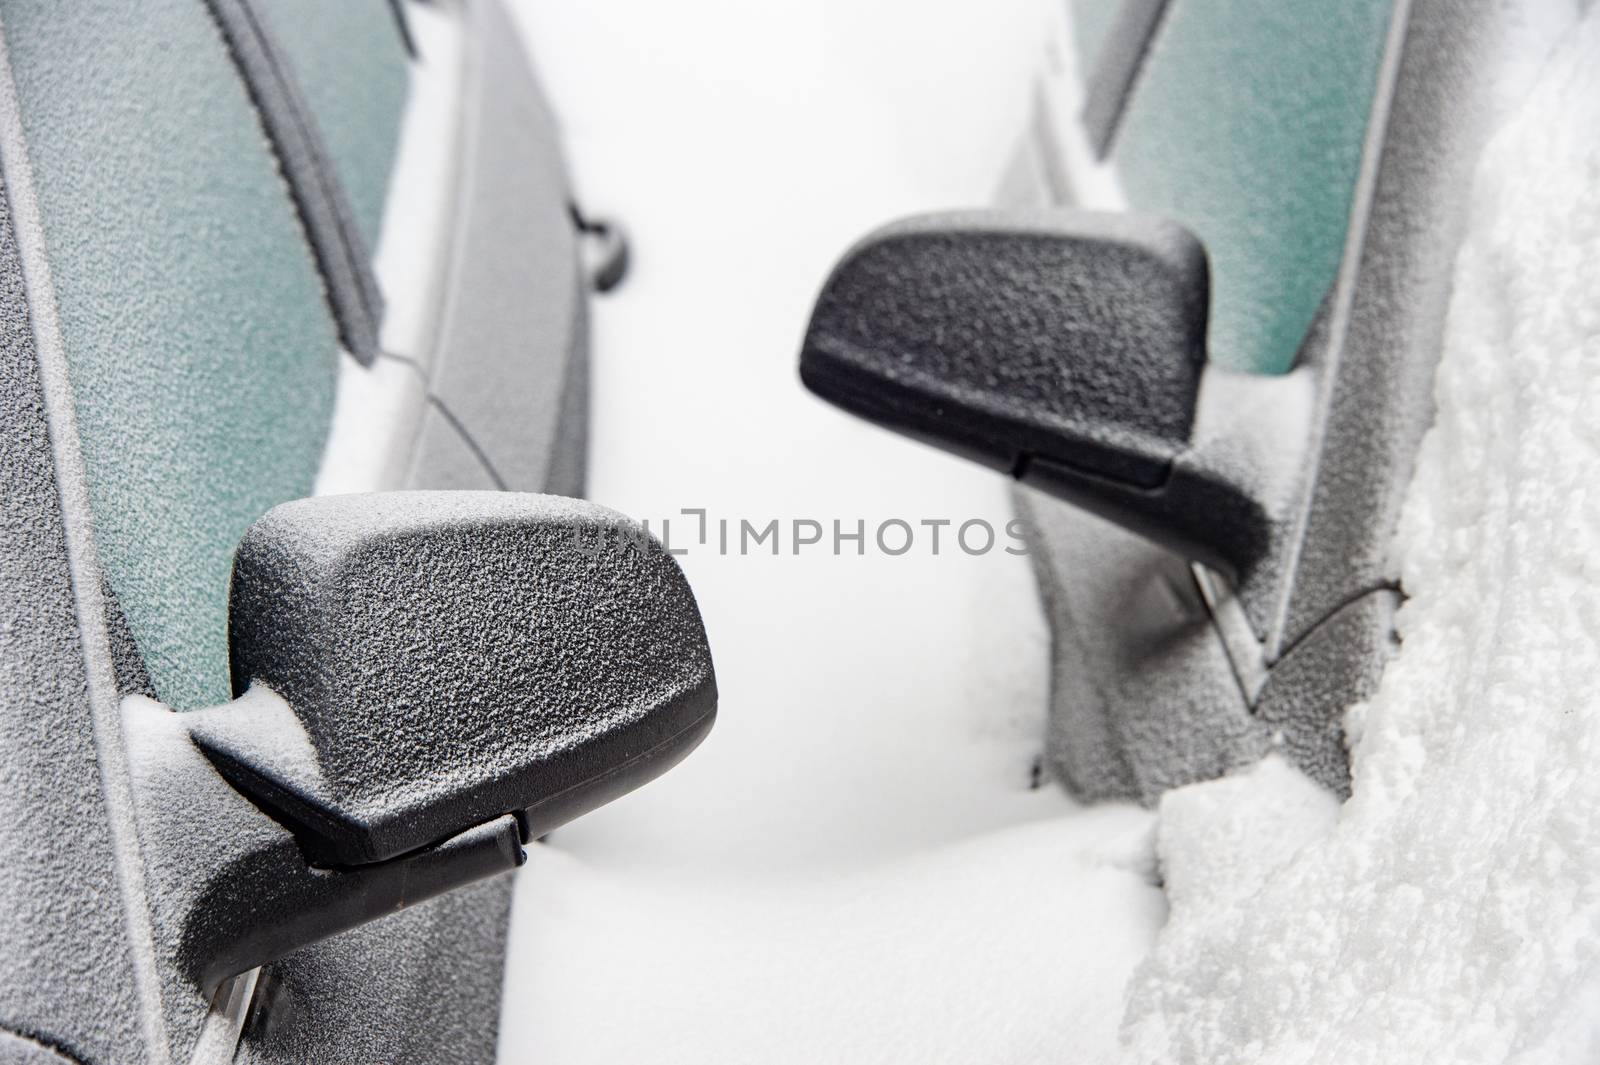 Car mirrors of two cars buried in the snow after snowstorm (Montreal, Canada)